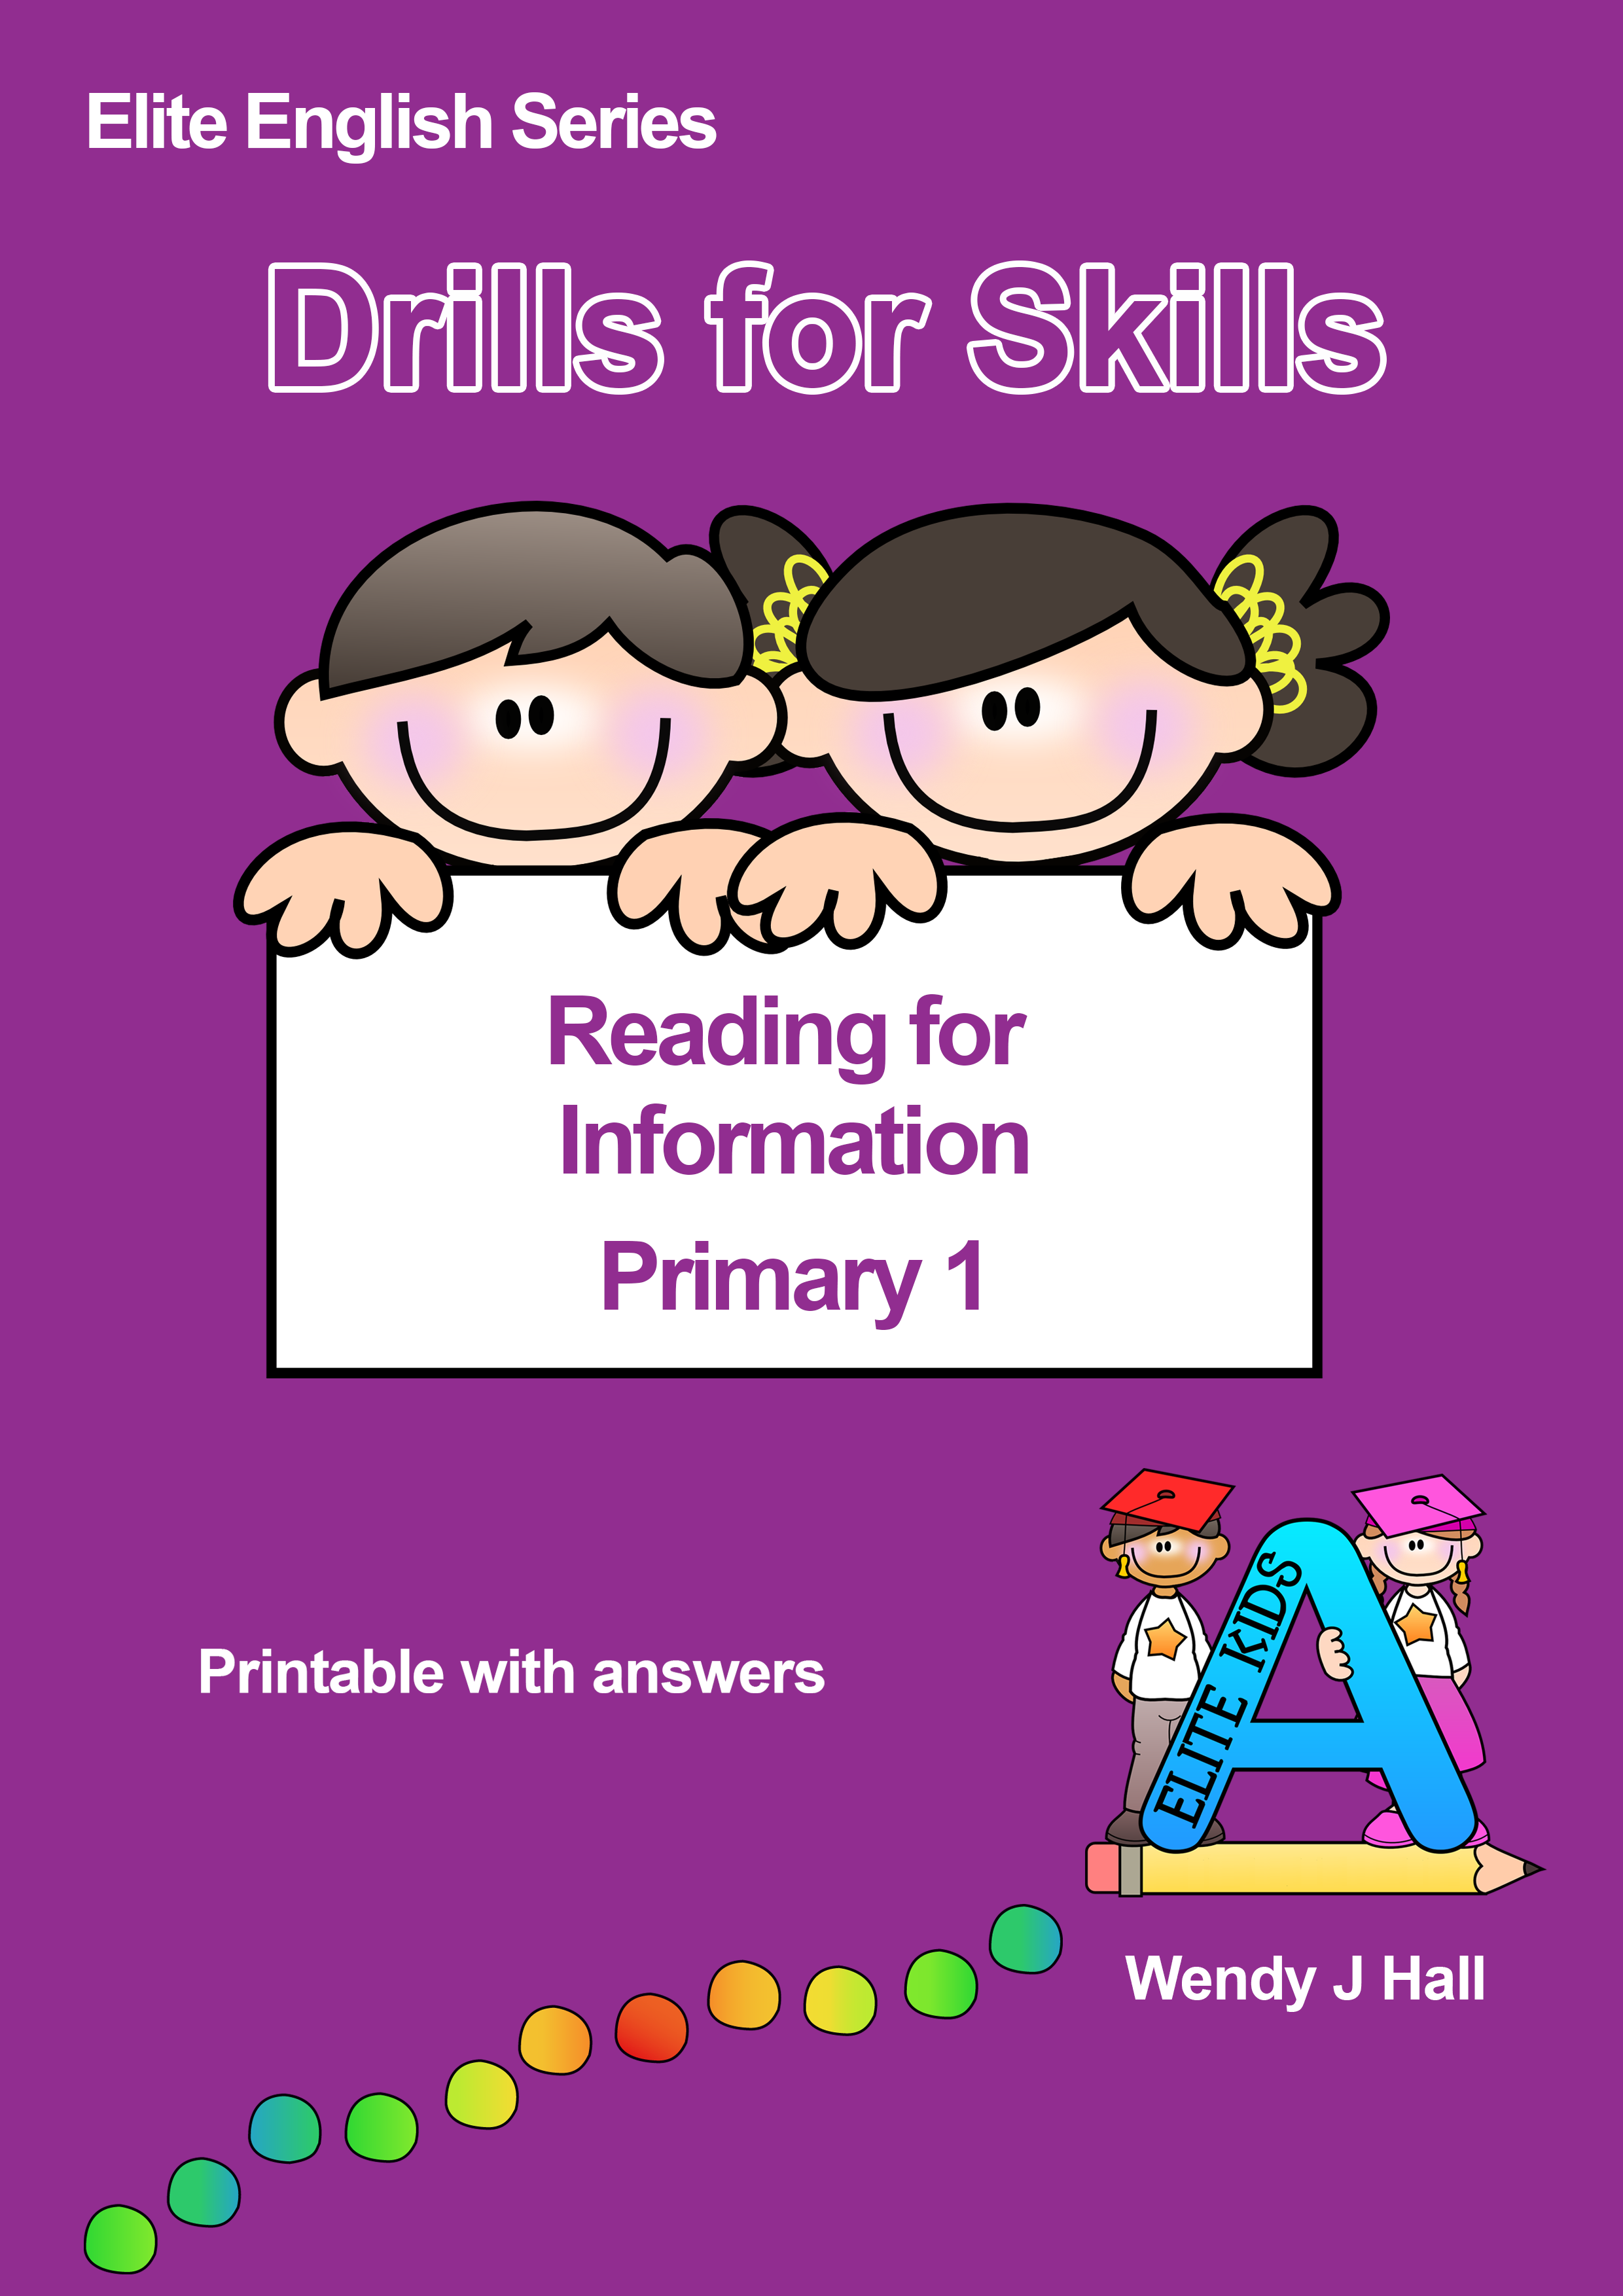 Drills for Skills - Reading for Information | Primary 1